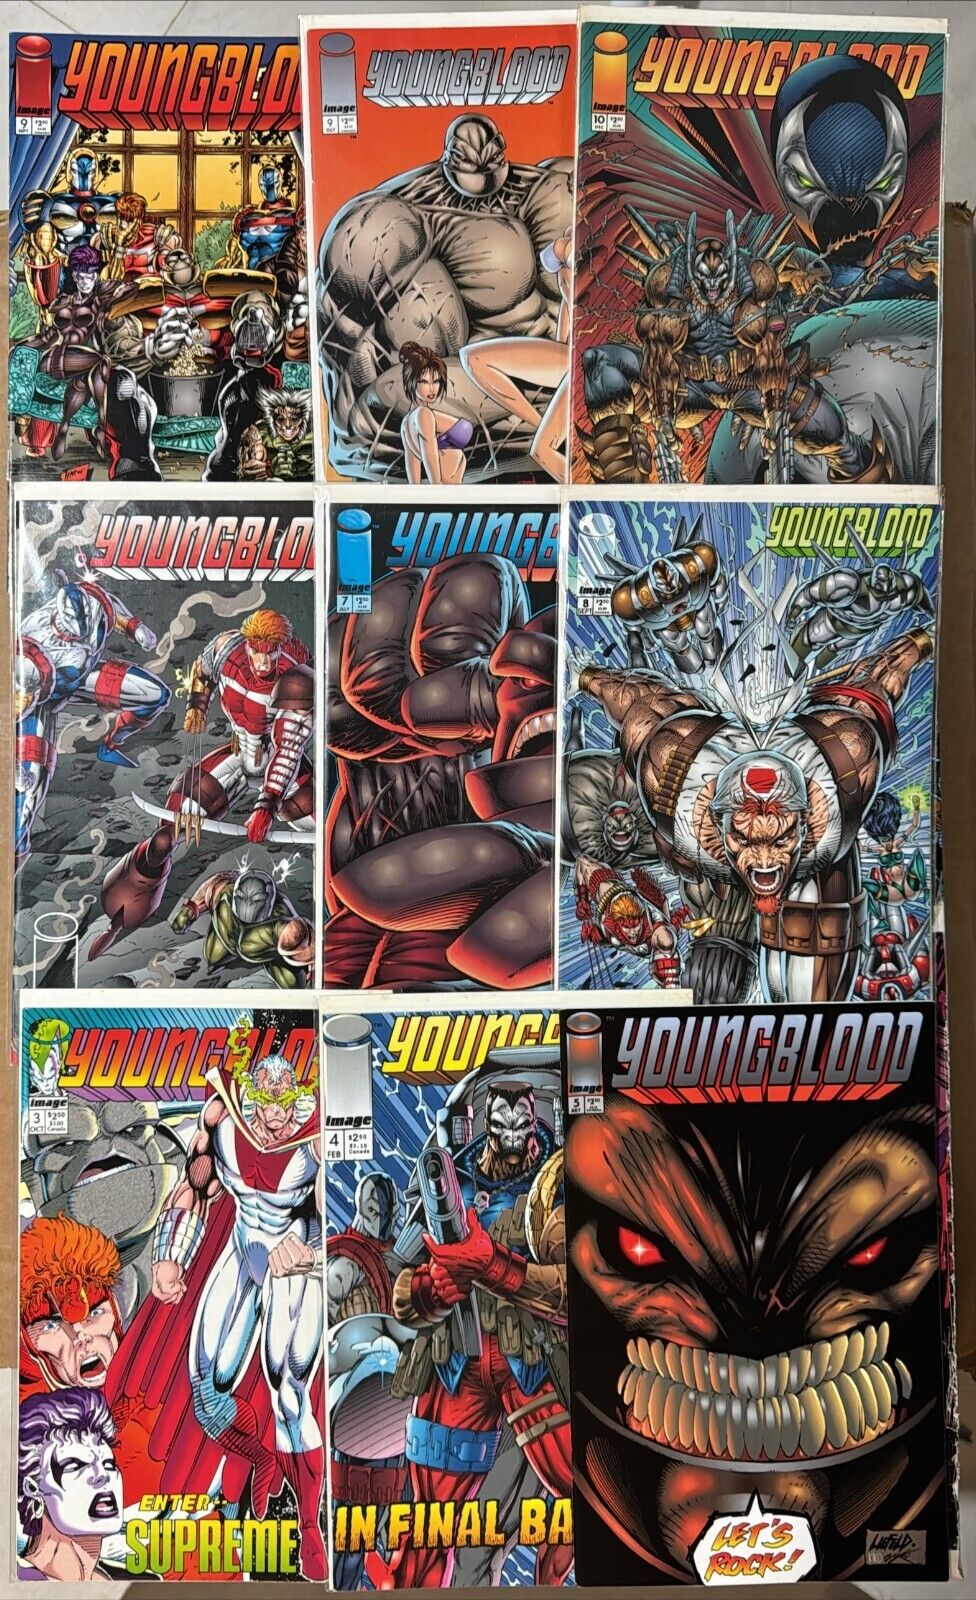 Youngblood #3, 4, 5, 6, 7, 8, 9, 9A, 10 Lot of 9 Image Comics Rob Liefeld 1992-4